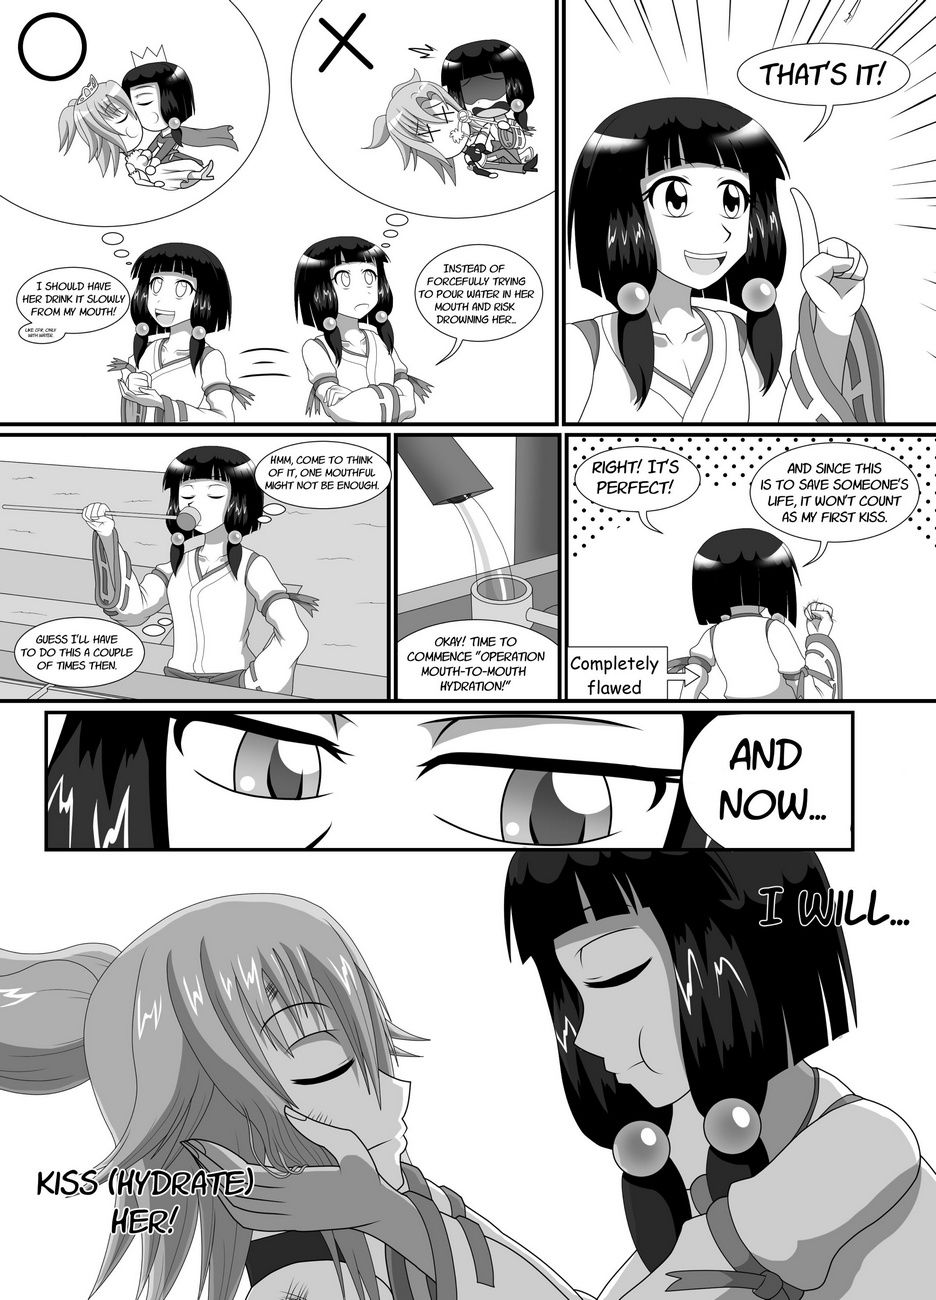 Miko X 몬스터 1 page 1